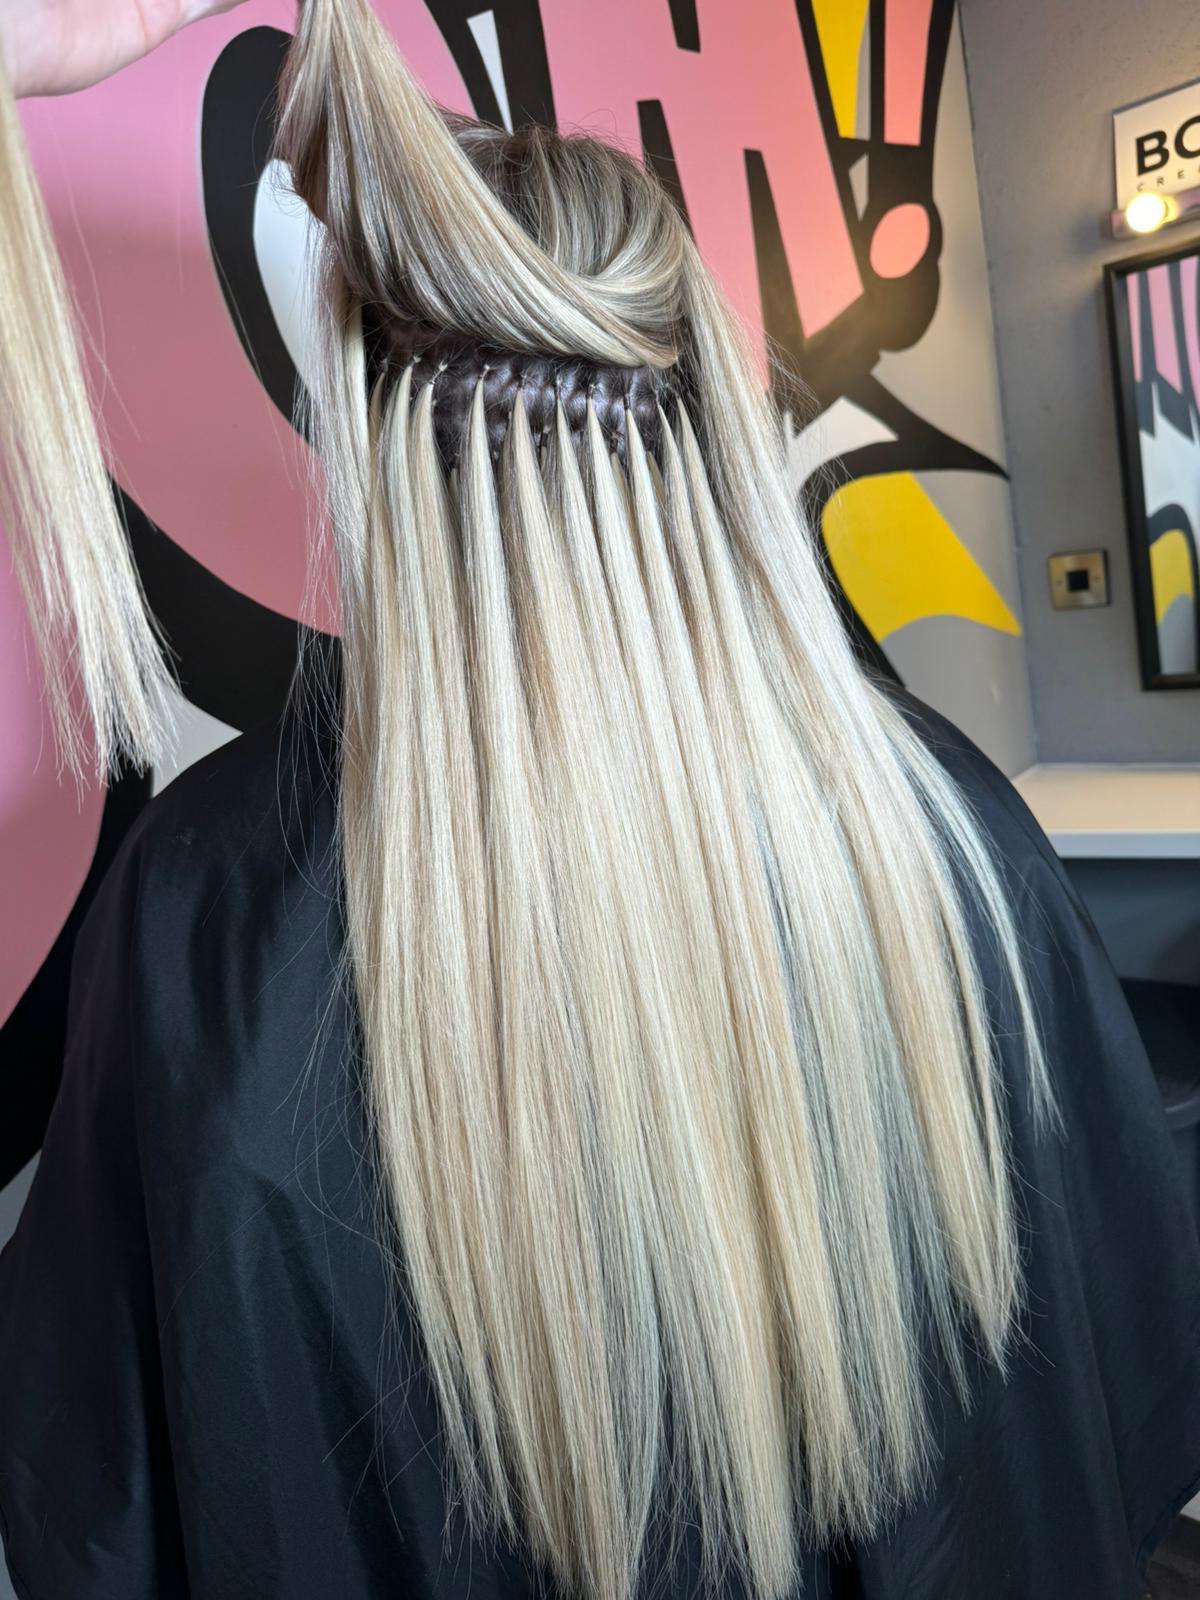 Boombae Hair Salon Manchester and Dublin | Hair Extensions – Which Should You Get?